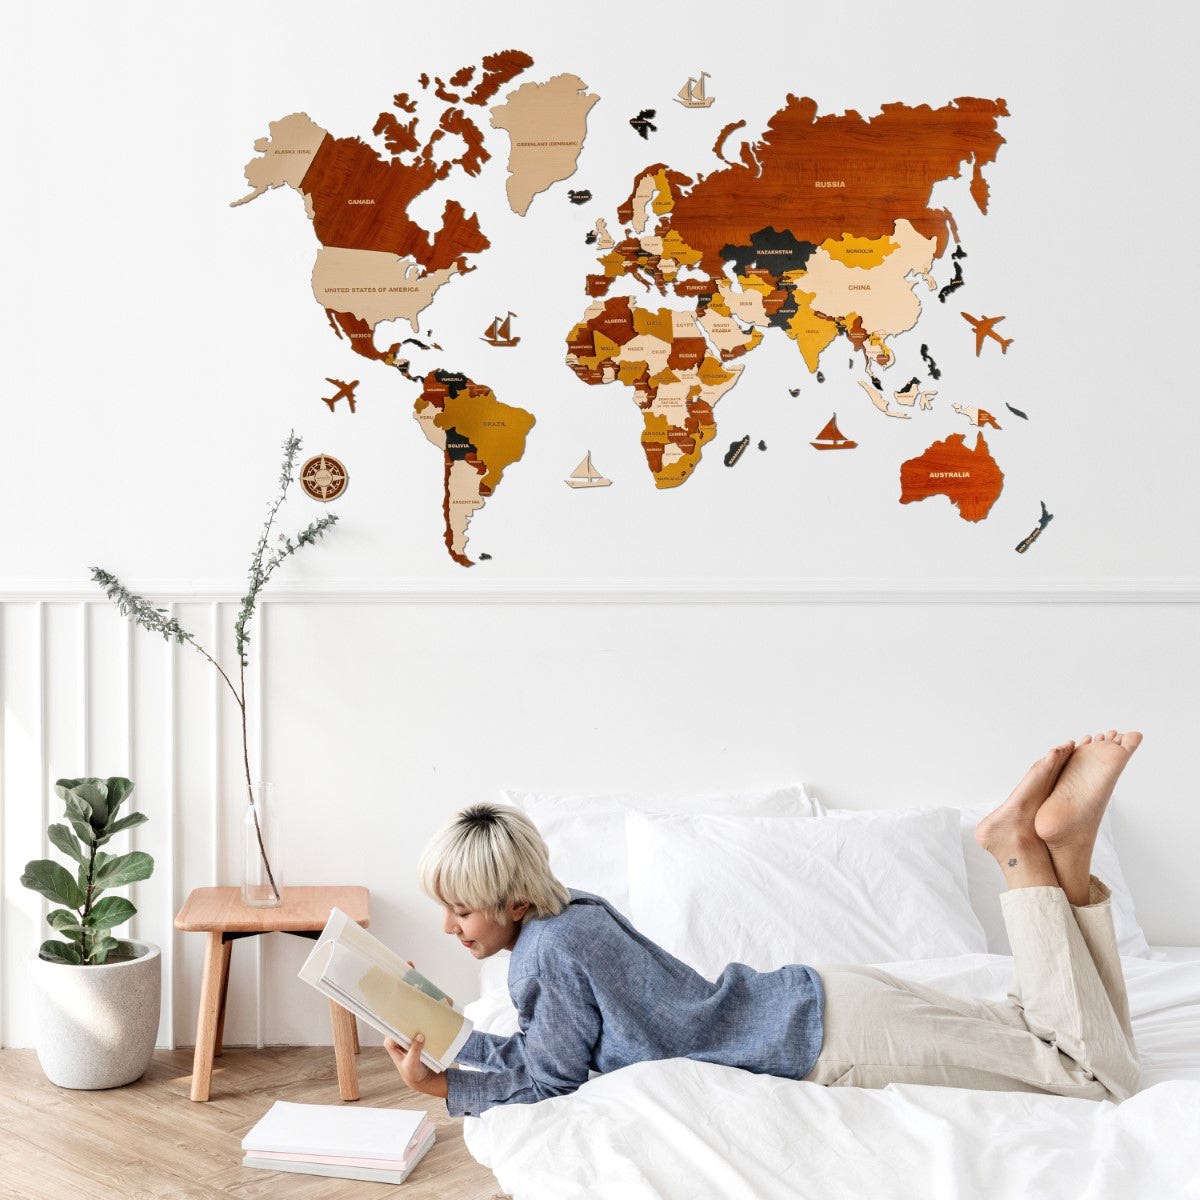 3D Prelaminated Multicolored Wooden World Map